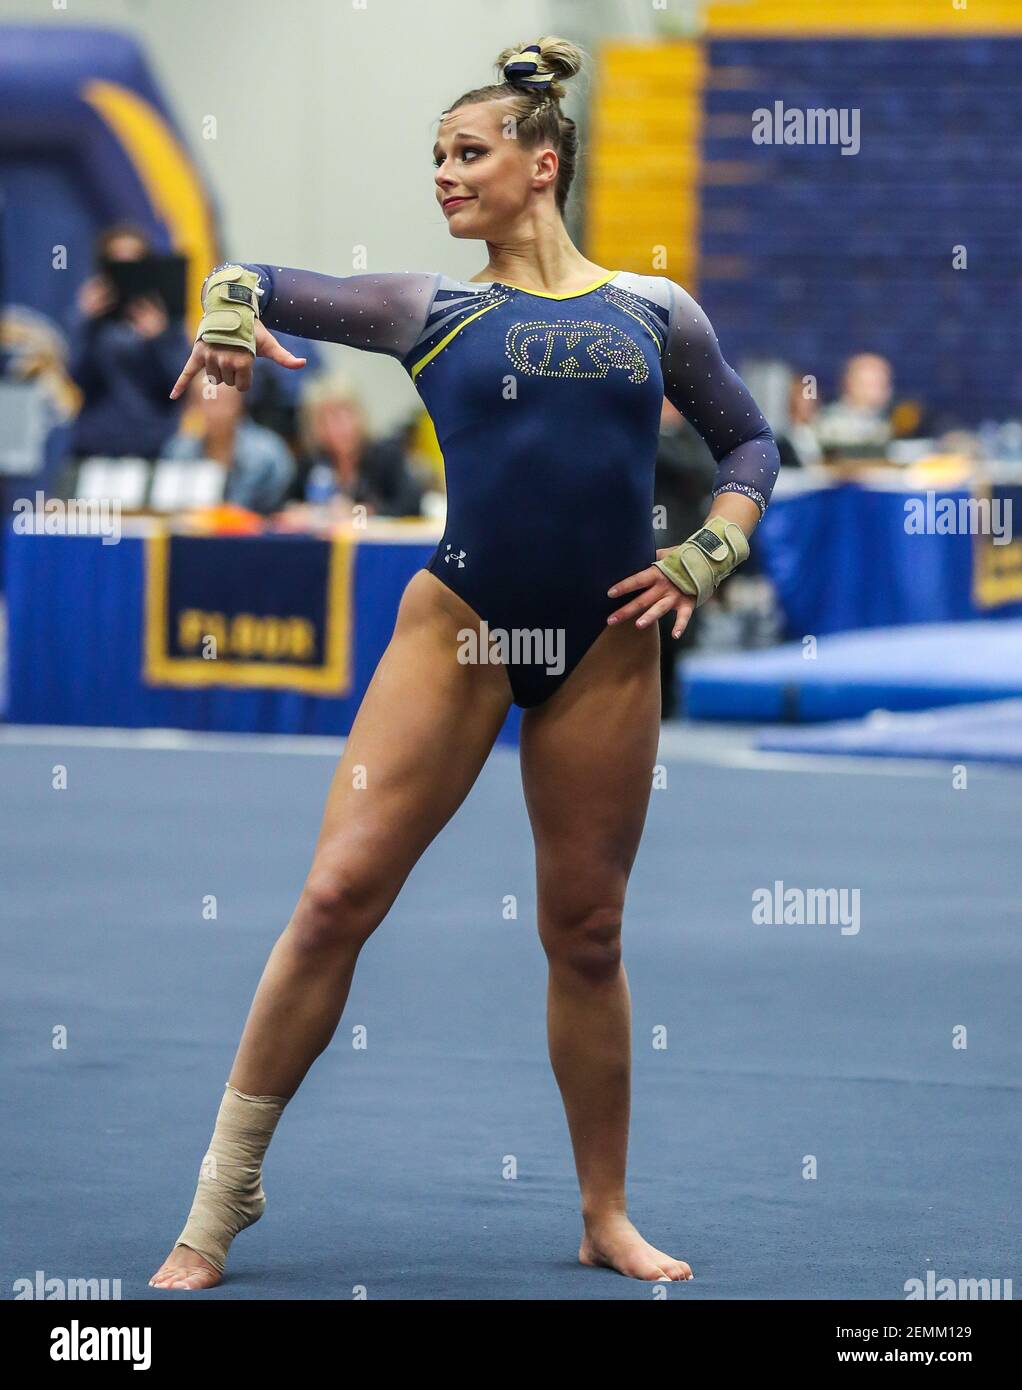 March 10, 2019: Kent State's Abby Fletcher completes her floor routine during the NCAA Women's Gymnastics quad meet between Kent State Flashes, UNC Tar Heels, Rutgers Scarlet Knights, and Ball State Cardinals at the MAC Center in Kent, OH. Kyle Okita/(Photo by Kyle Okita/CSM/Sipa USA) Stock Photo